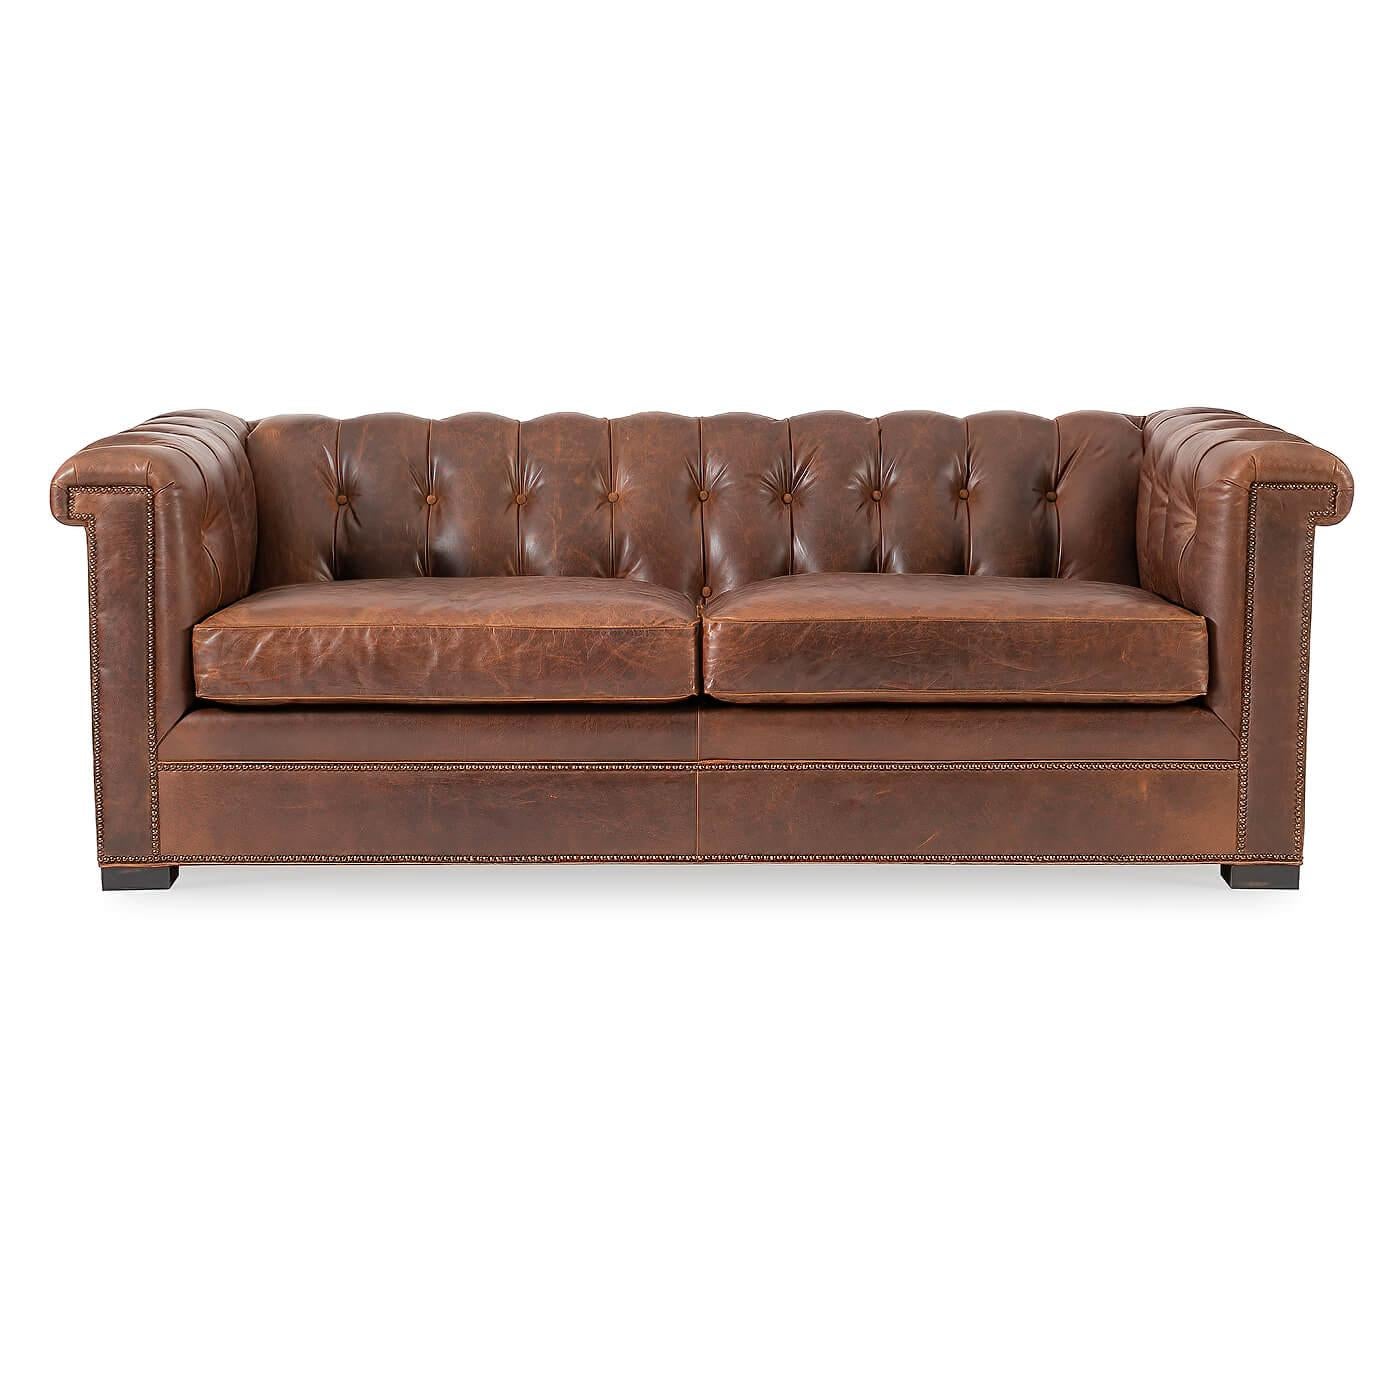 A Modern leather Chesterfield sofa. A take on the traditional 19th century English design with squared arms and backrest. 

The arms and backrest tufted with two comfort down seat cushions. Finished with brass nailhead details and raised on modern